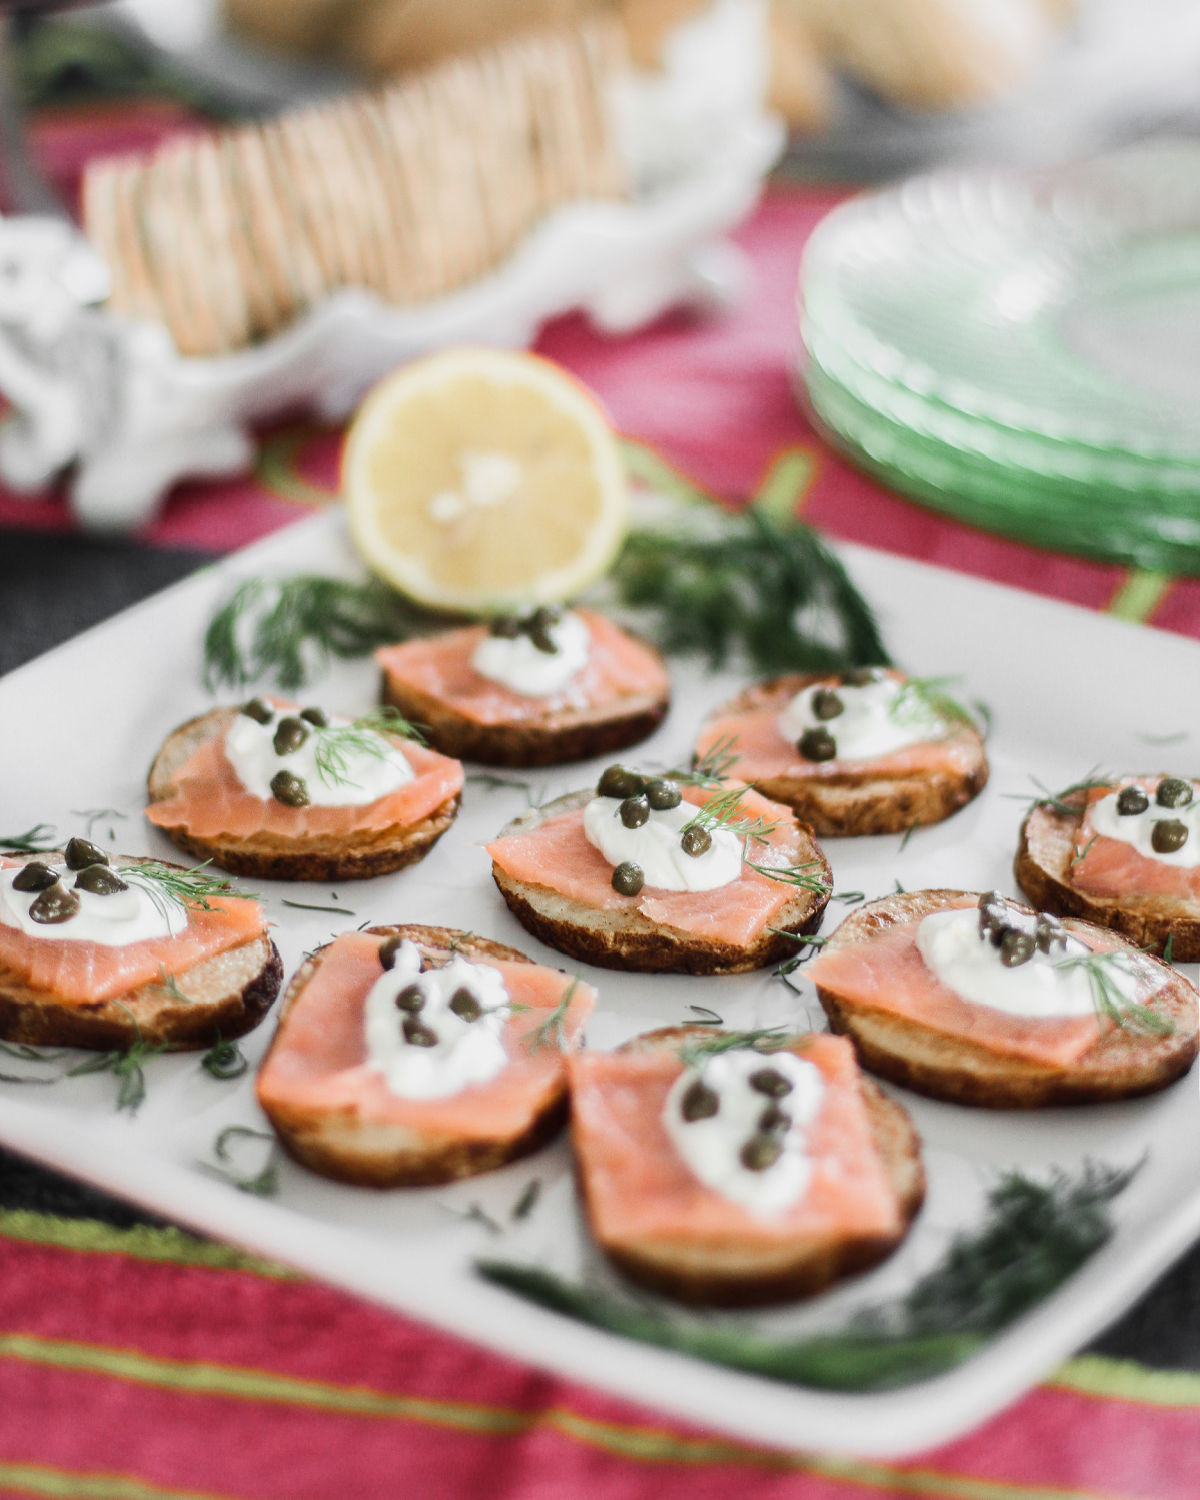 salmon on potato slices topped with sour cream and capers.